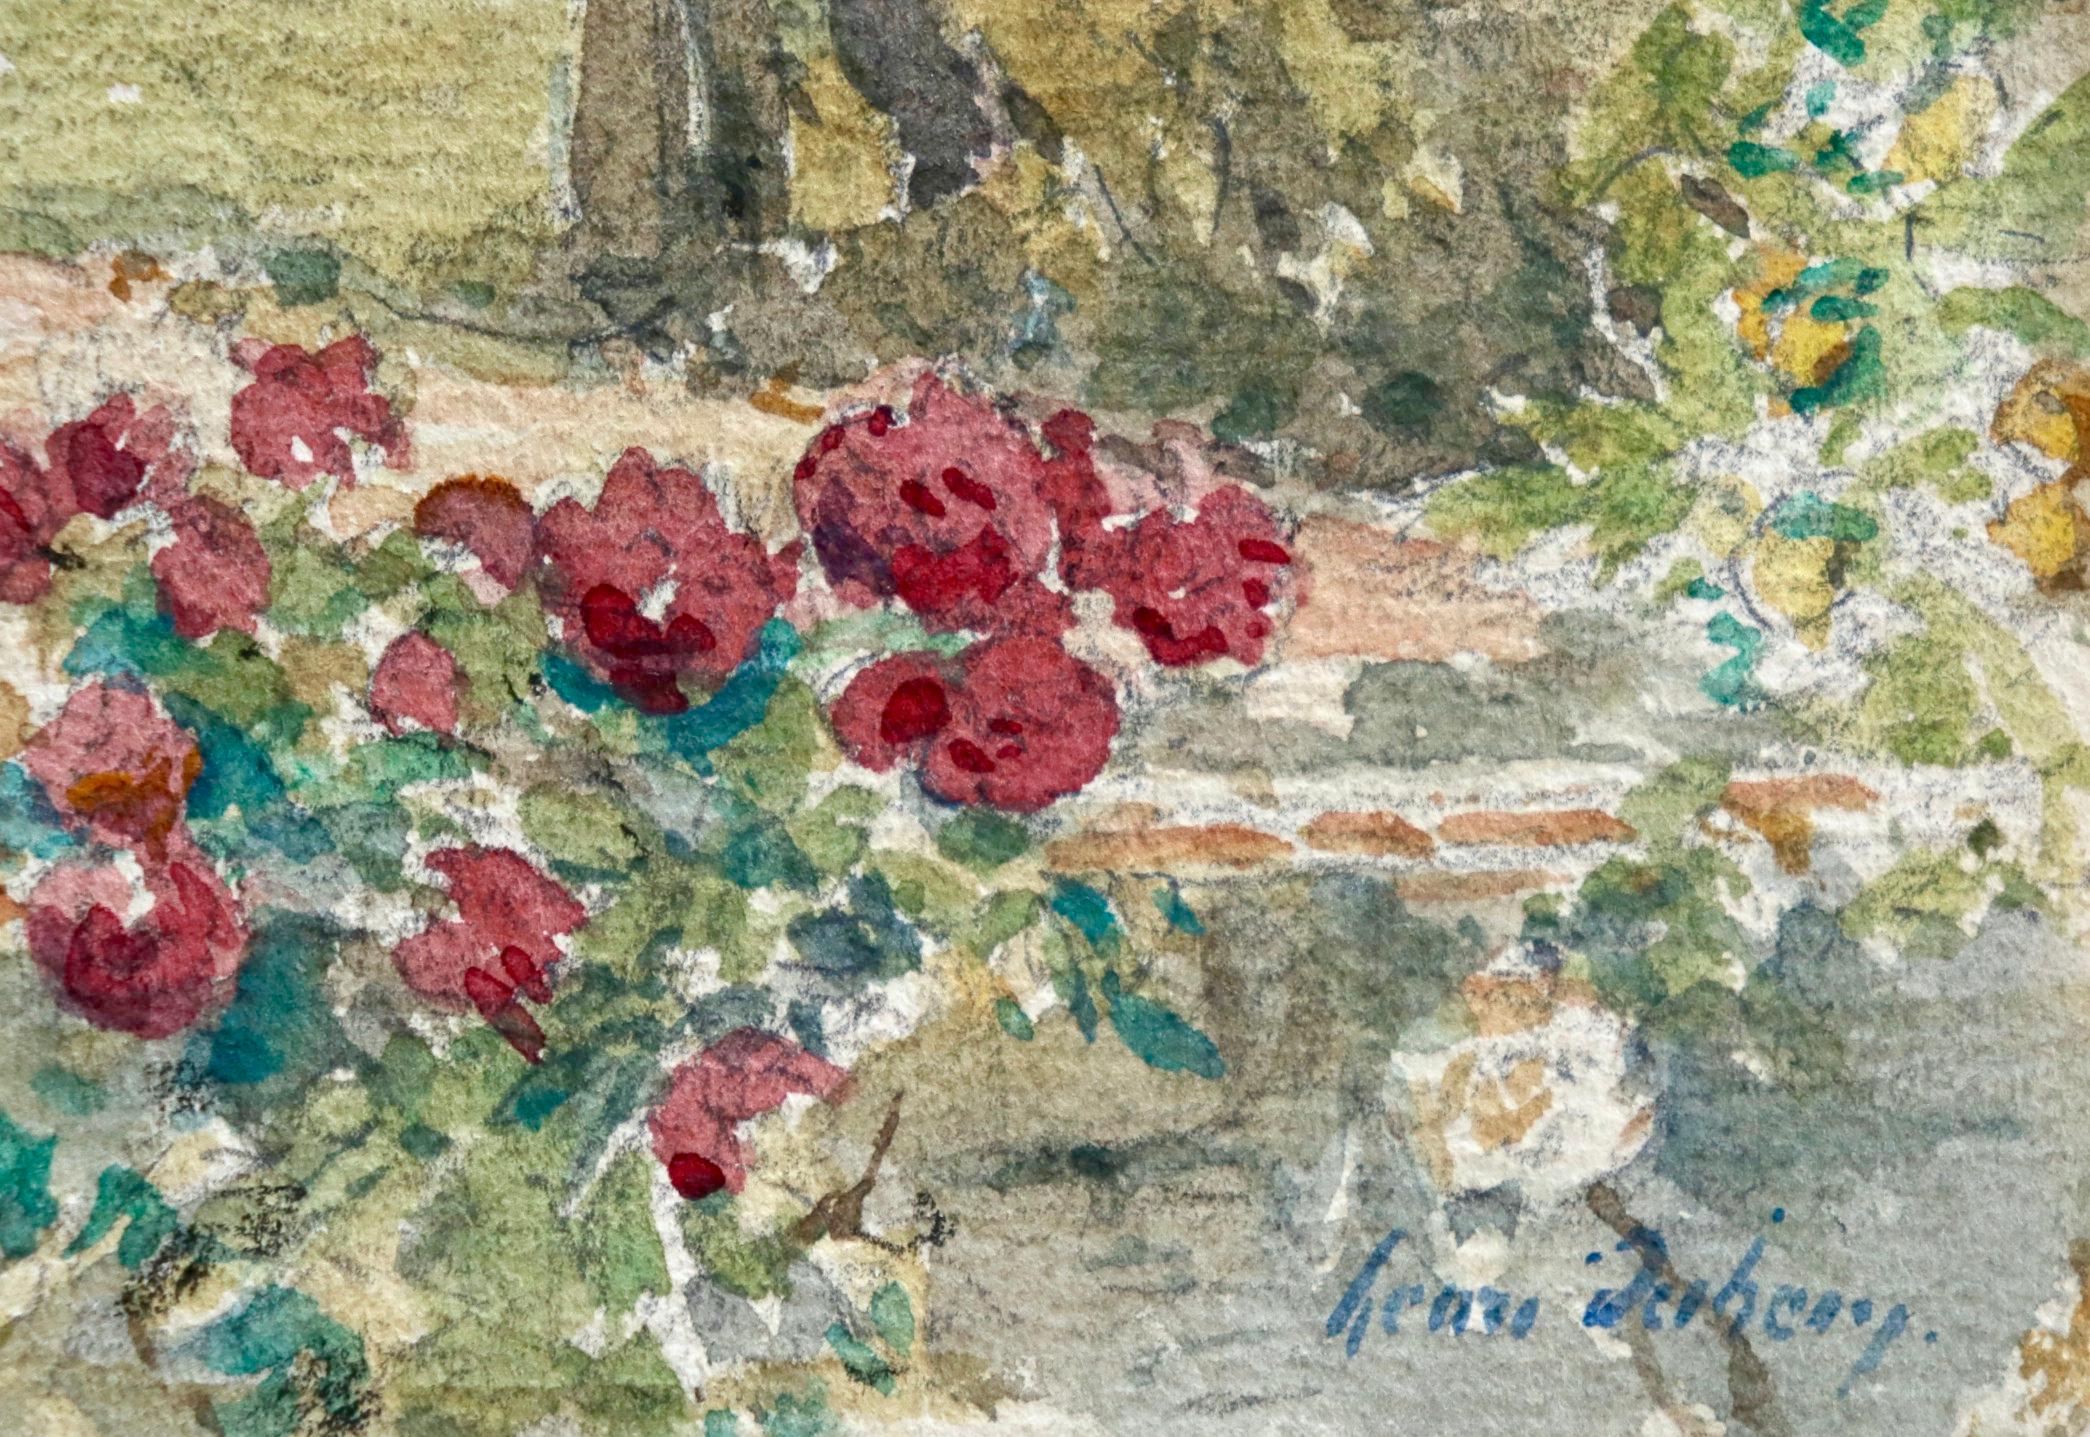 Watercolour on paper circa 1910 by French Impressionist painter Henri Duhem, depicting roses lining a garden wall with trees and landscape beyond. Signed lower right. This piece is not currently framed but a suitable frame can be sourced if